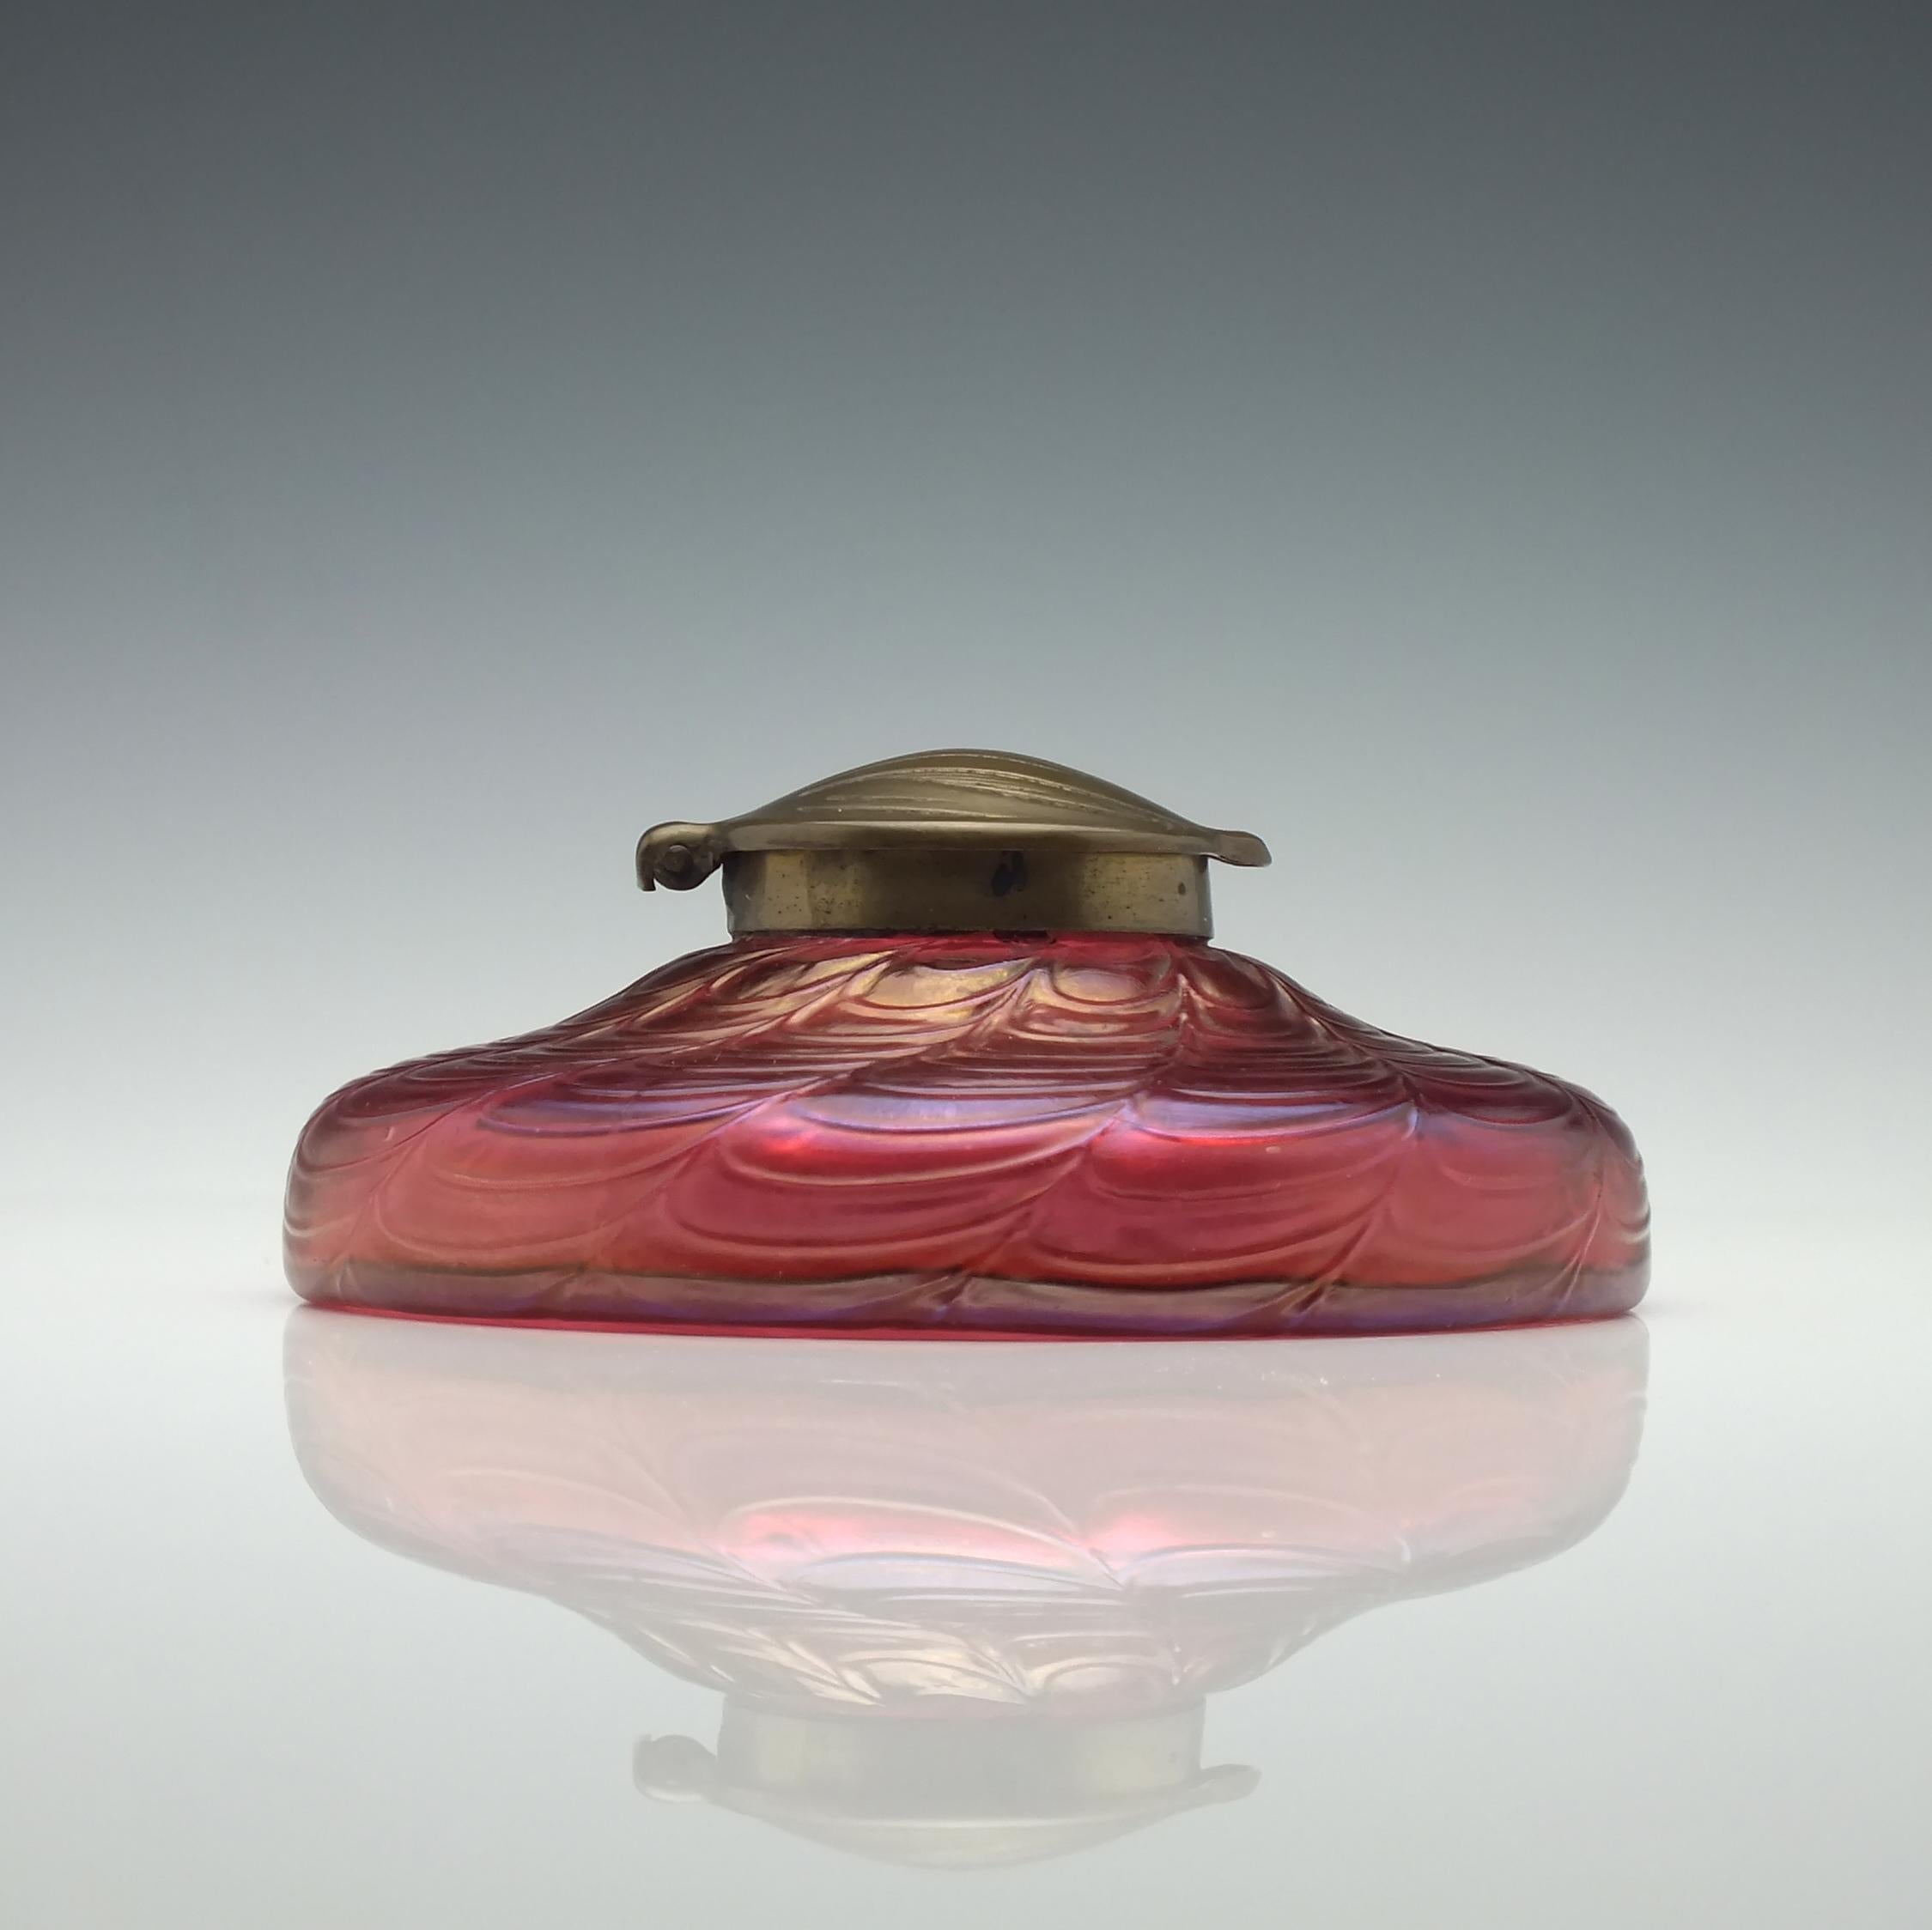 Date and origin 

Klostermühle, Bohemia, circa 1910.

Condition

Excellent, age-related wear as shown. 

Dimensions 

Height 5.7cm, diameter 13.3cm

Weight

455 grams

Technical Description 

A Loetz glass inkwell. A short body